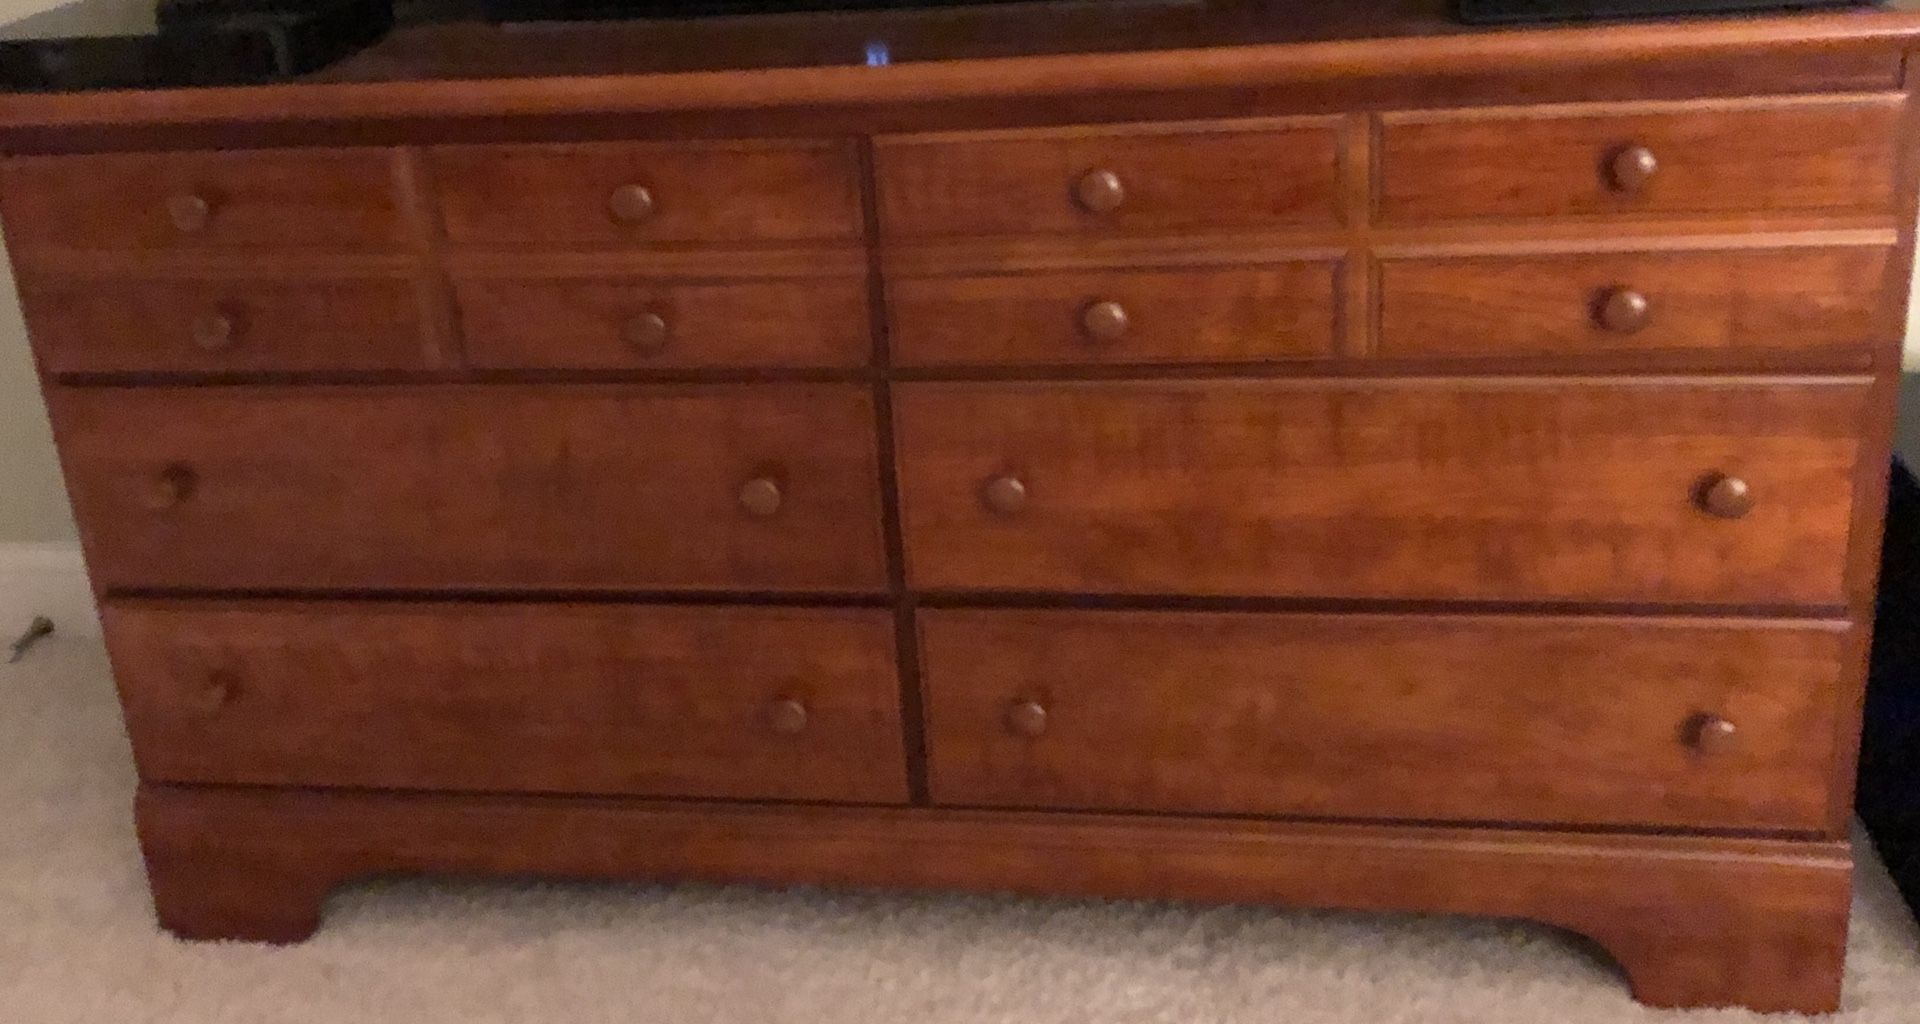 Wood 6 drawer long dresser has a matching nightstand as well